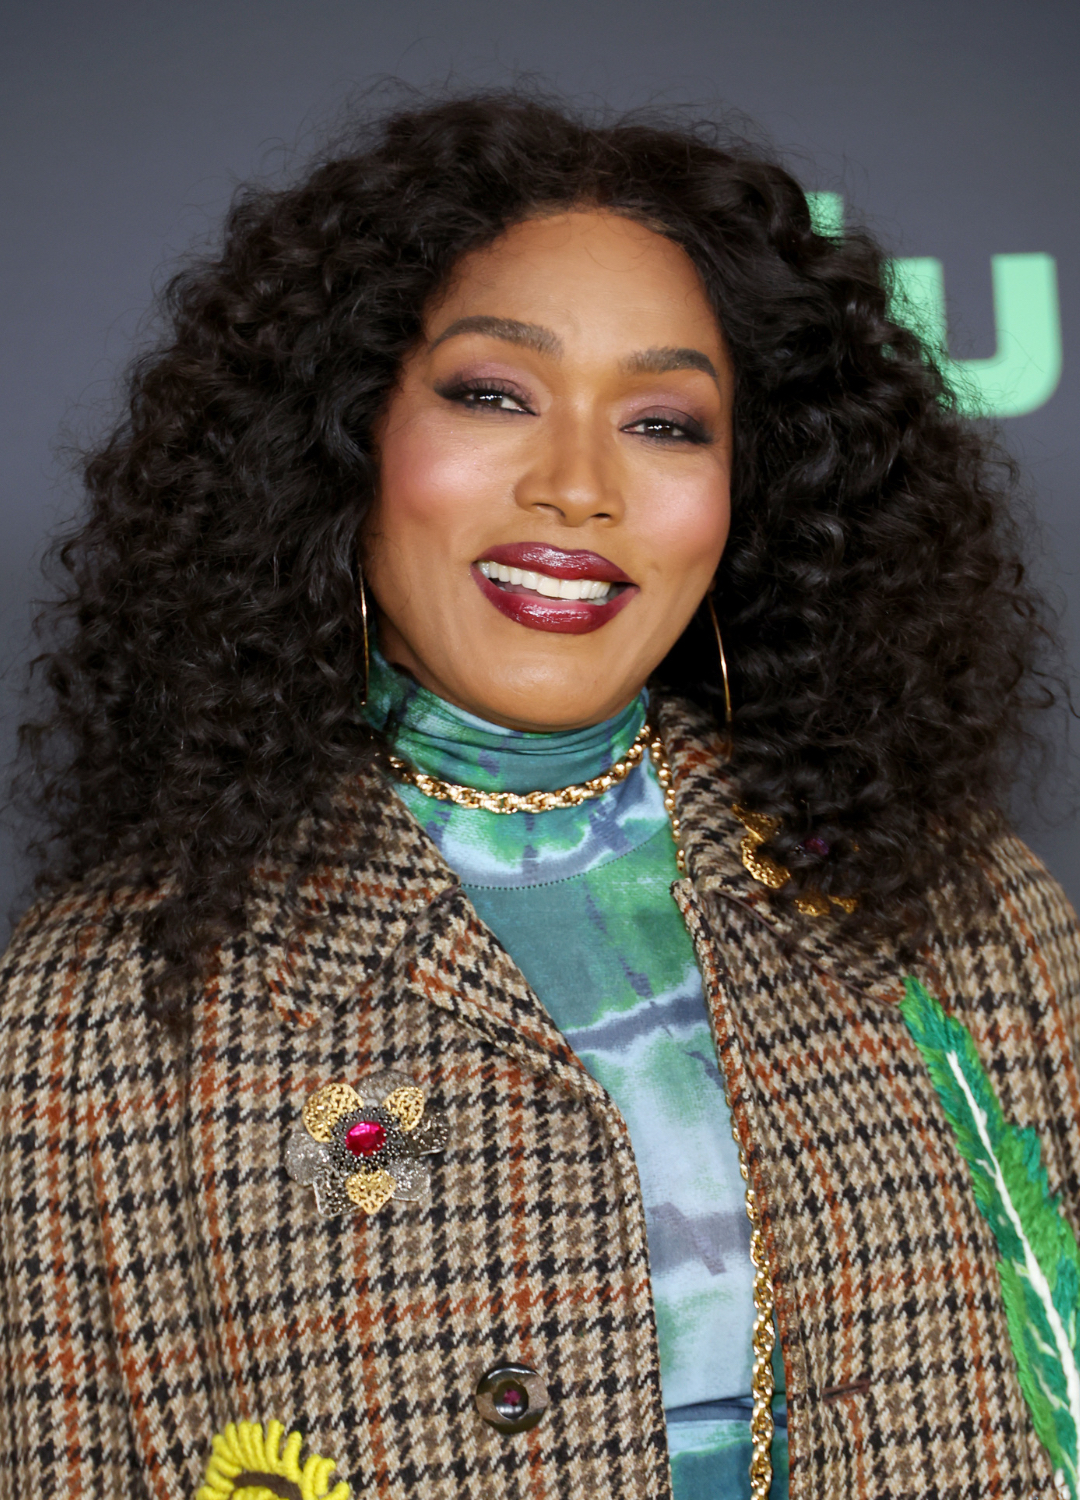 Angela Bassett attends the Los Angeles premiere of National Geographic documentary series 